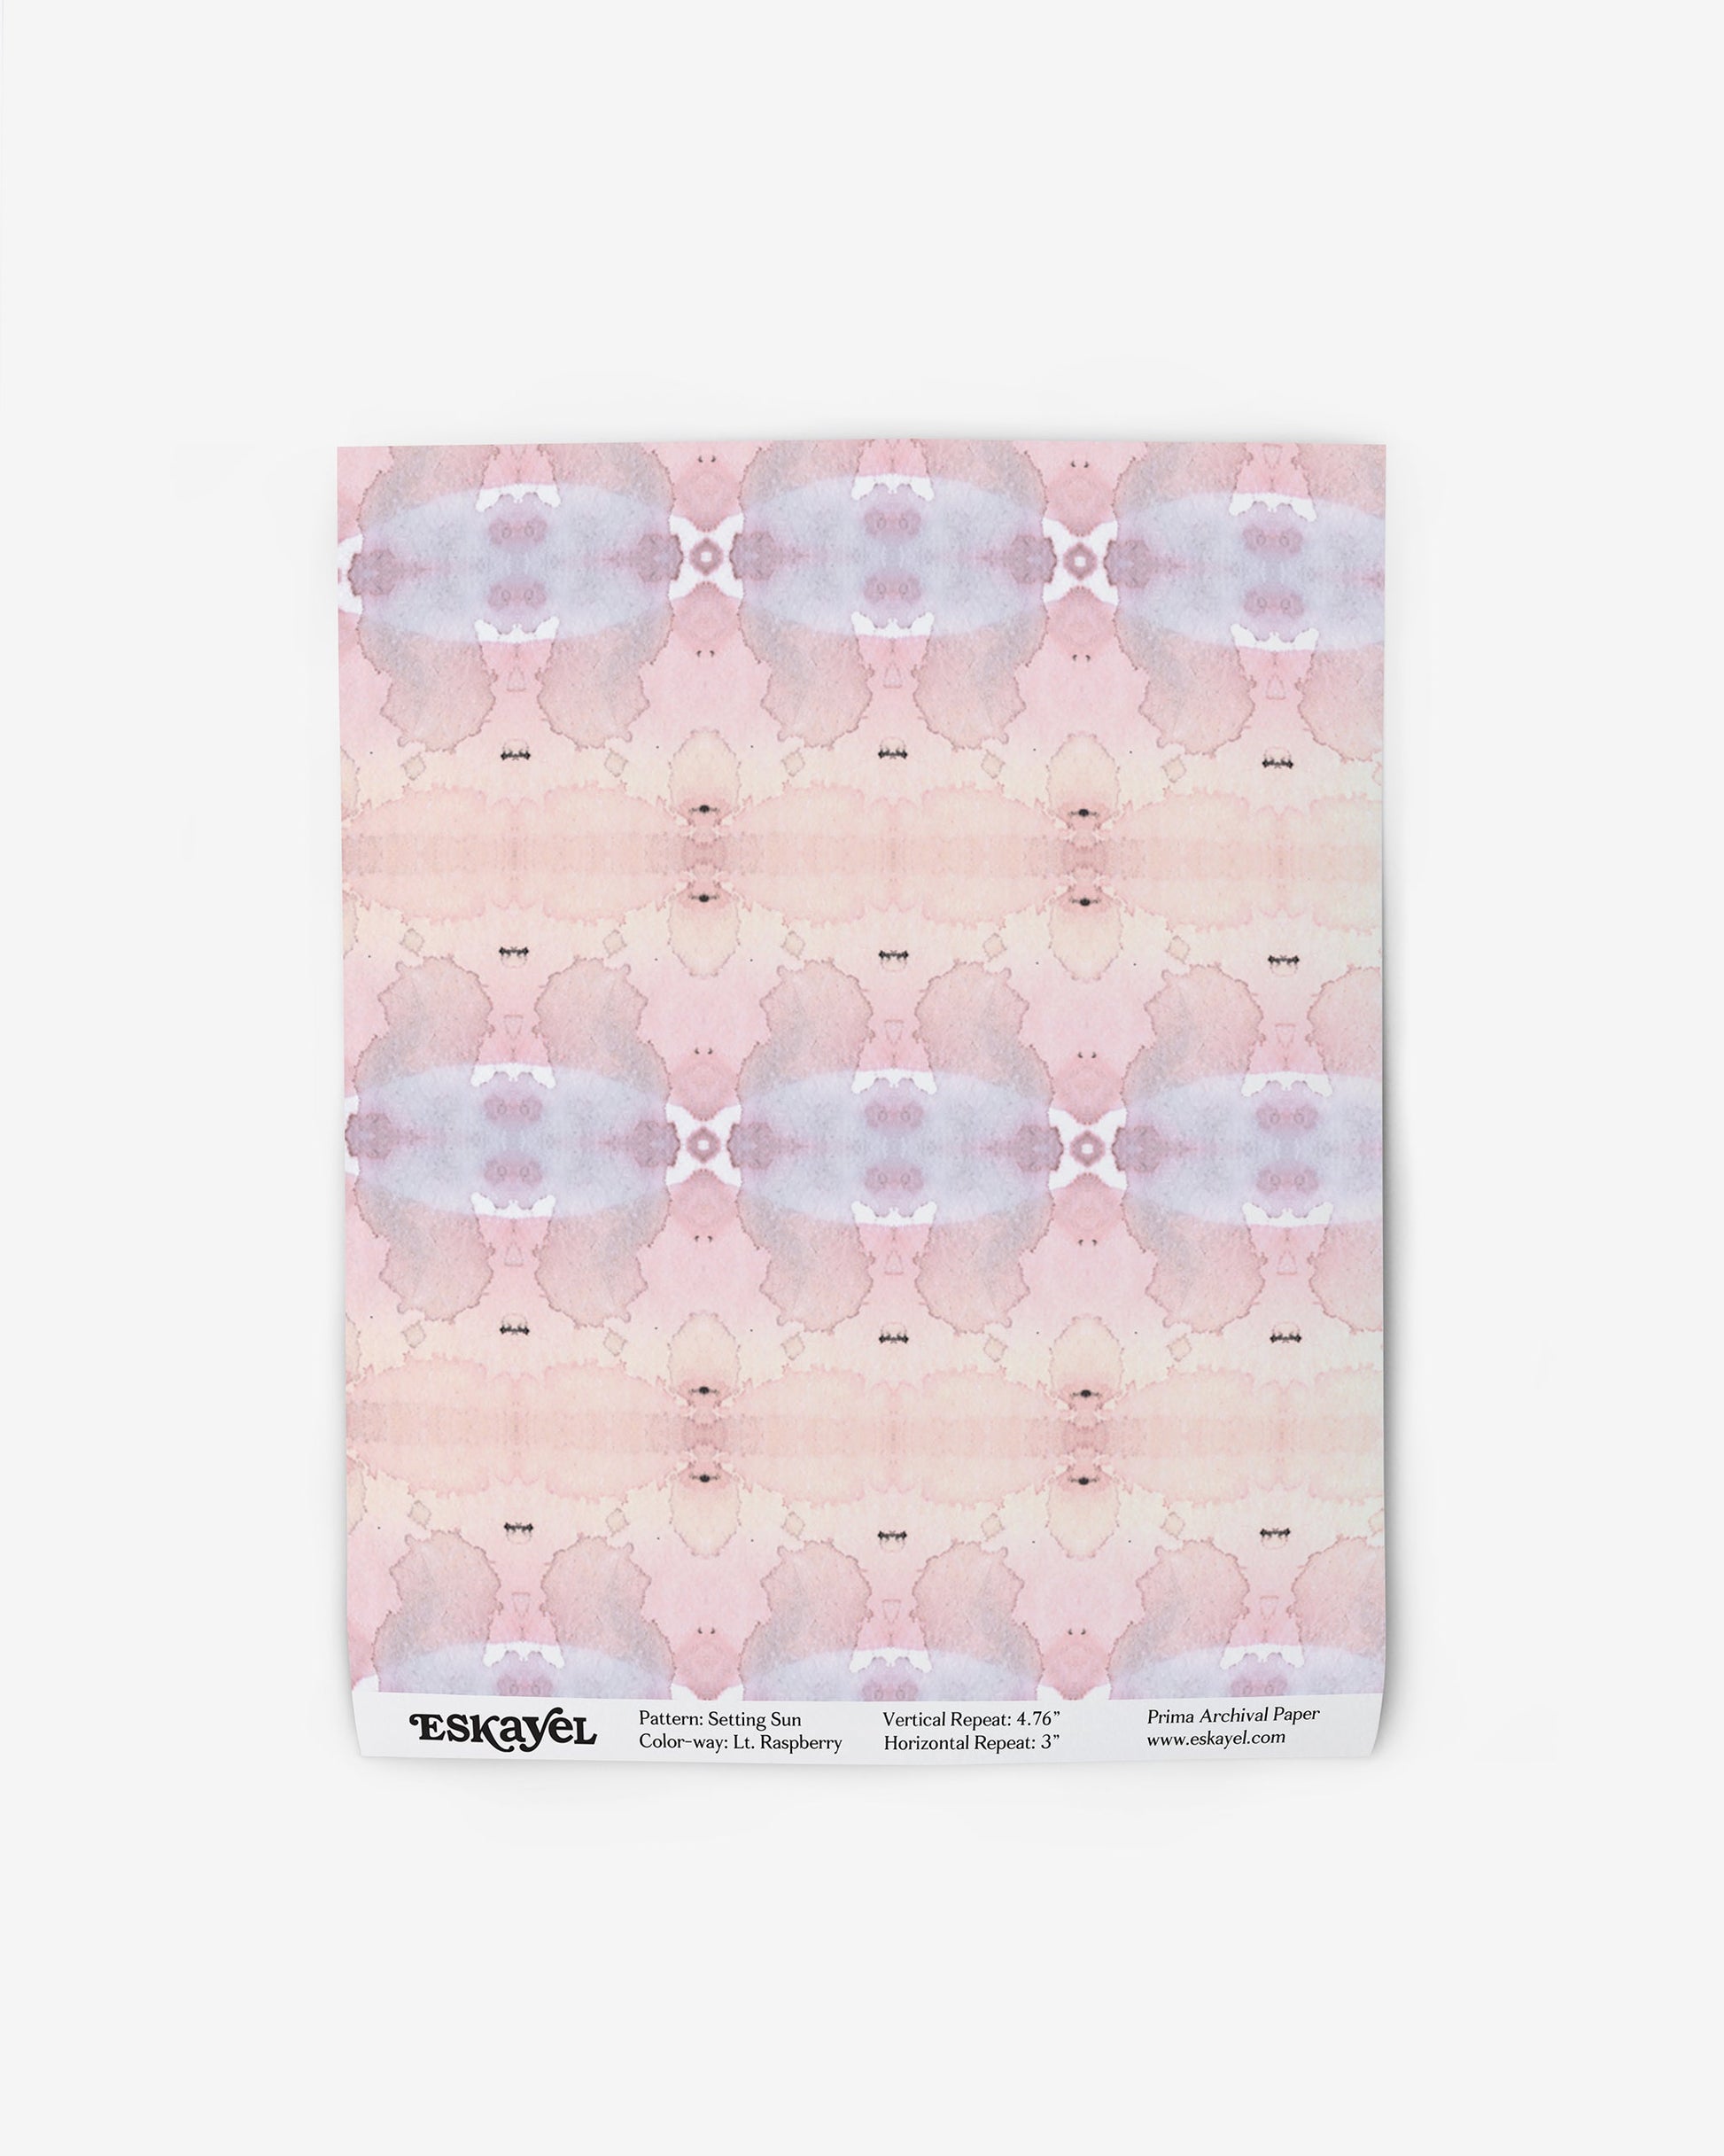 A pink and blue watercolor pattern on wallpaper, inspired by the abstract Setting Sun Wallpaper in Light Raspberryon wallpaper